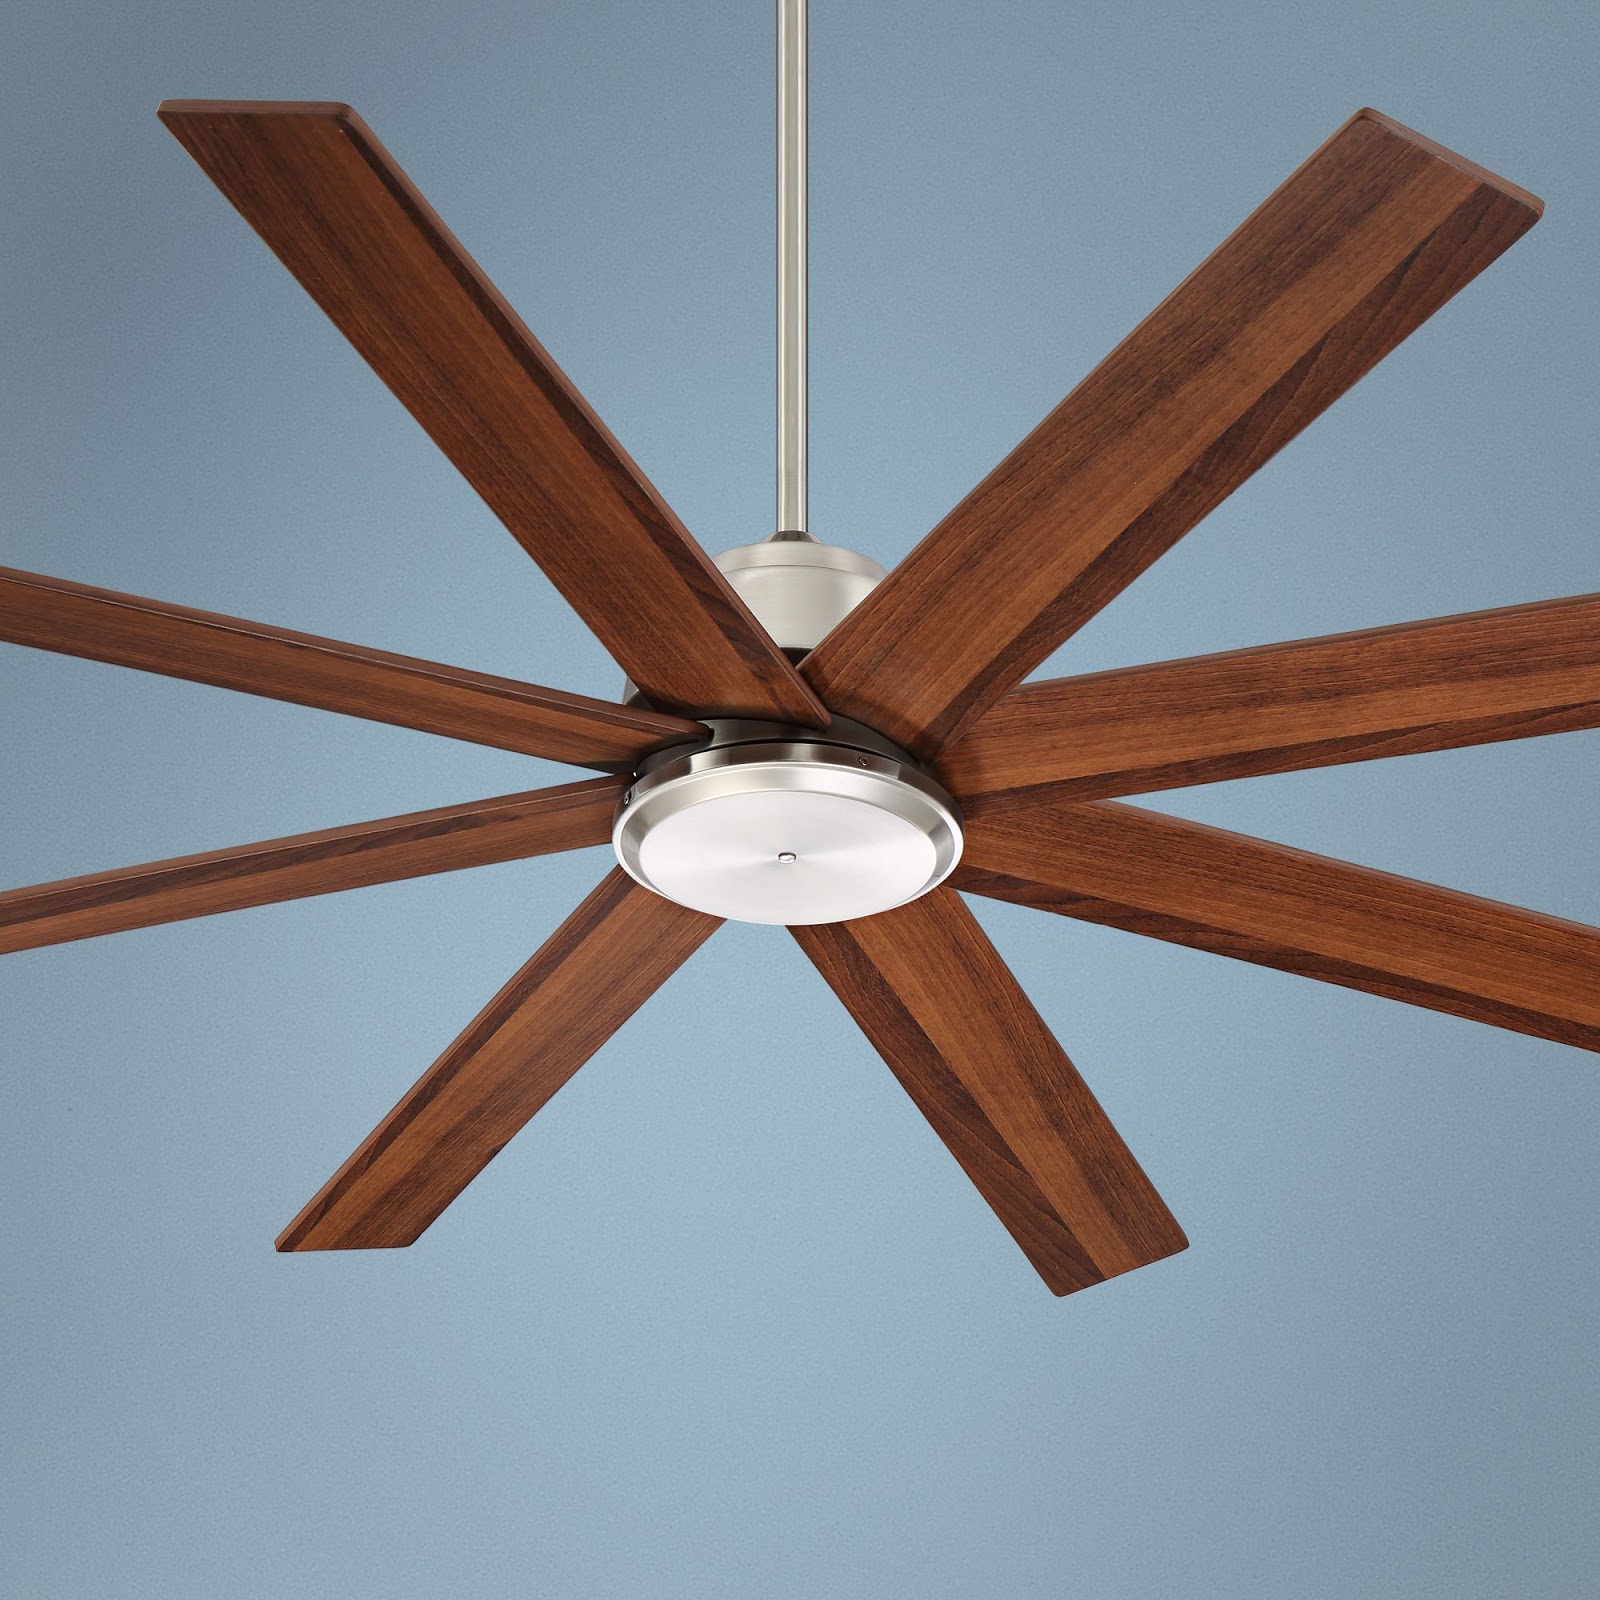 Lamps Plus Shares Top Trending Ceiling, Who Makes The Best Outdoor Fans 2018